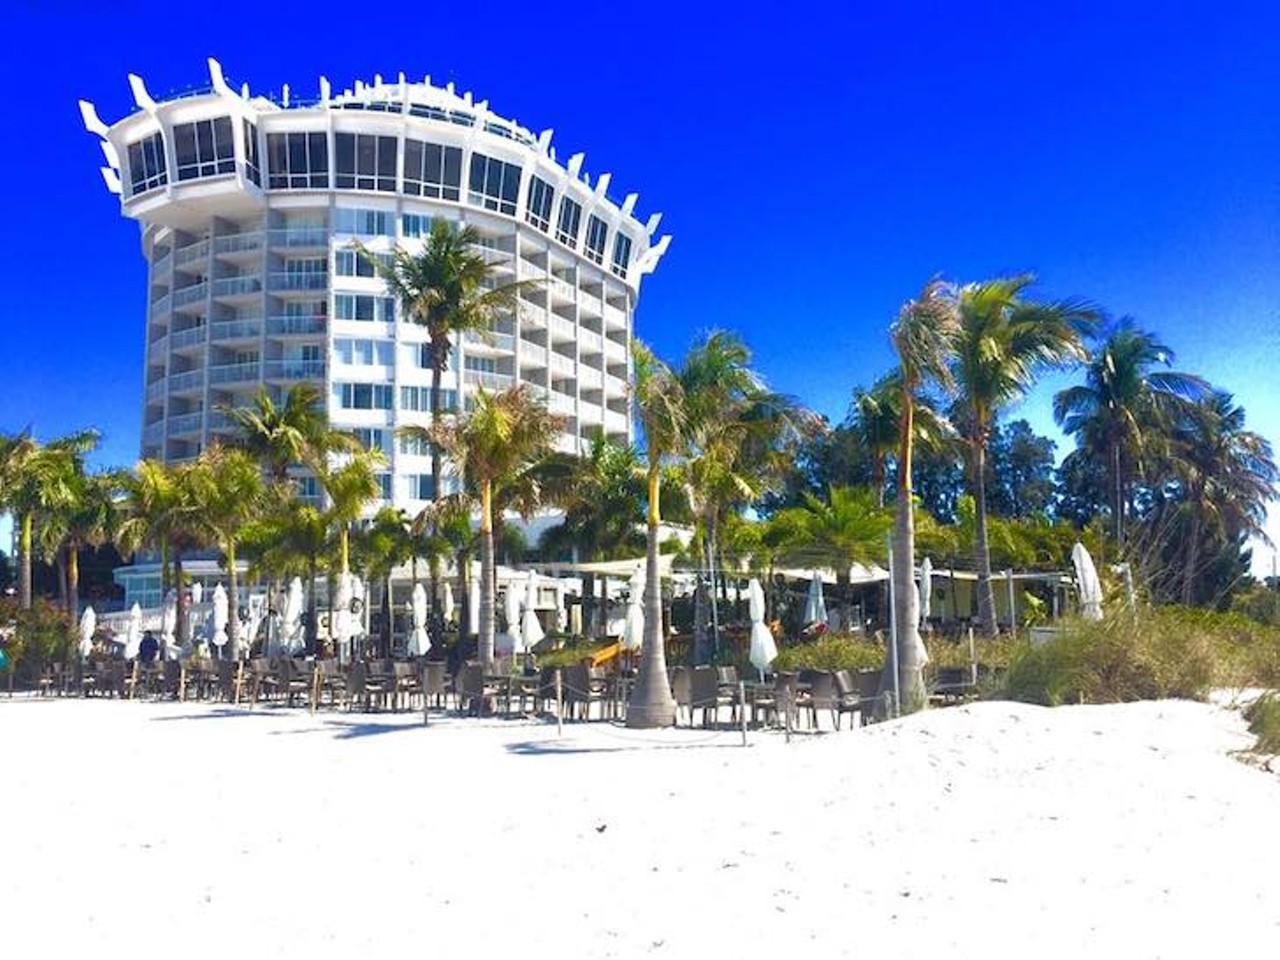 Bongo Beach Bar and Grille  
5250 Gulf Blvd., St. Pete, 800-448-0901
Bring a loved one here and sit fireside while enjoying daily live music, coconut crusted shrimp, and signature frozen drink.
Photo via Bongo Beach Bar and Grille/Facebook